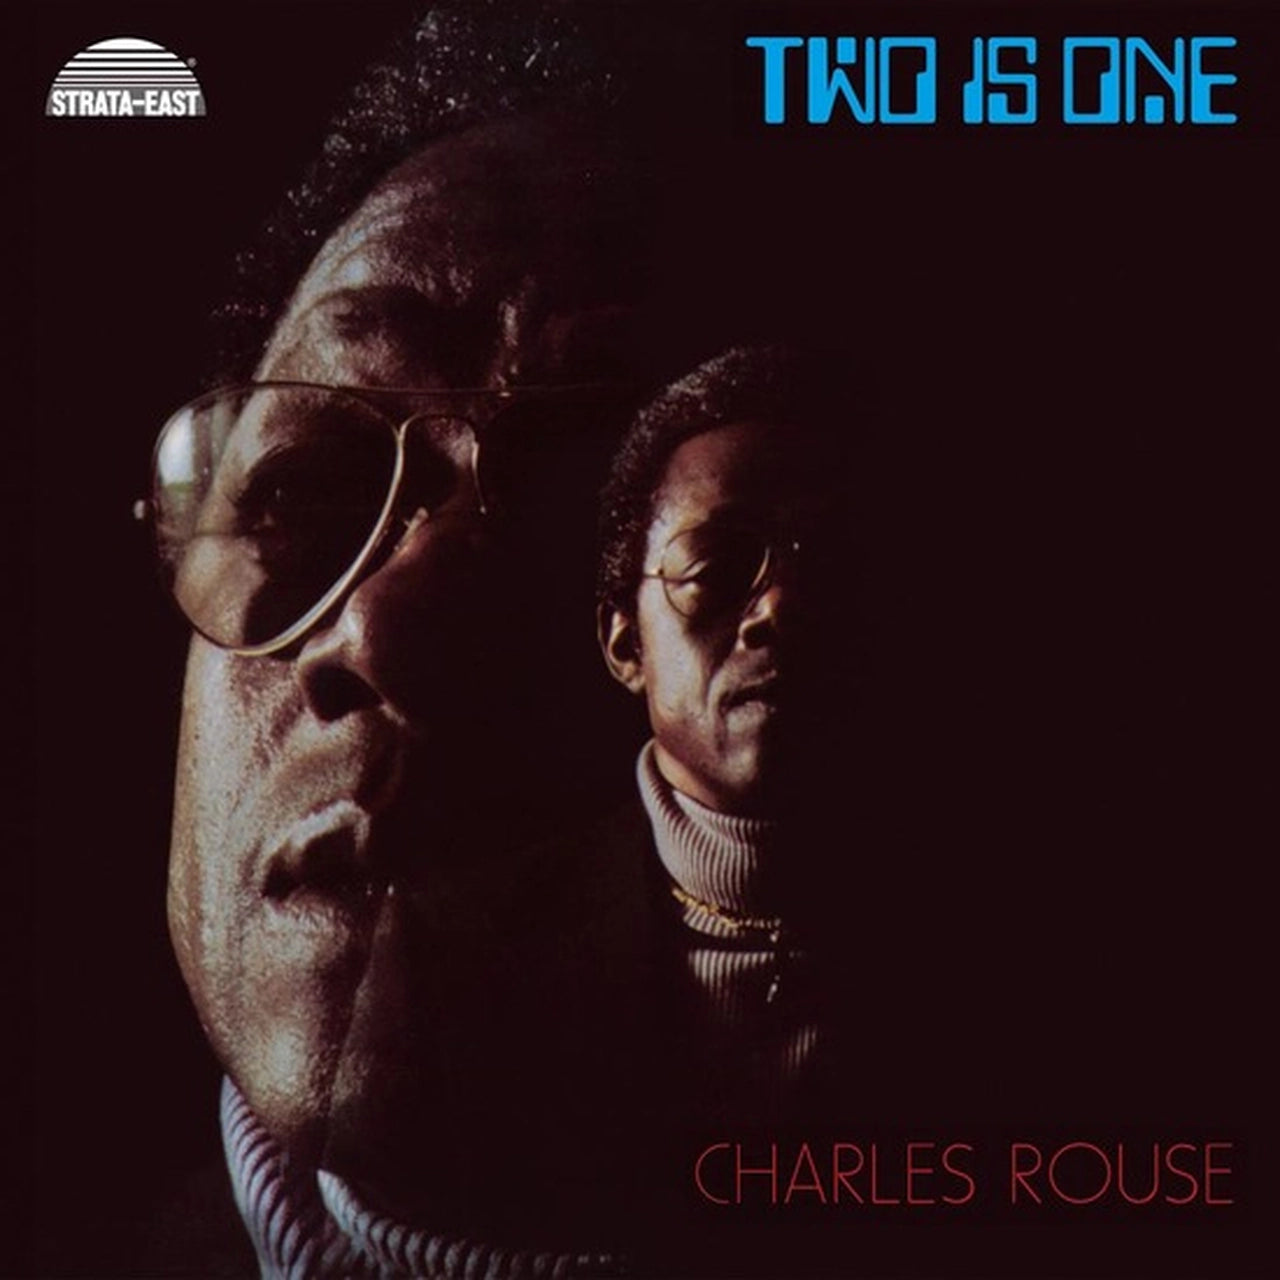 Charles Rouse - Two Is One LP (180g Audiophile, Limited Edition)